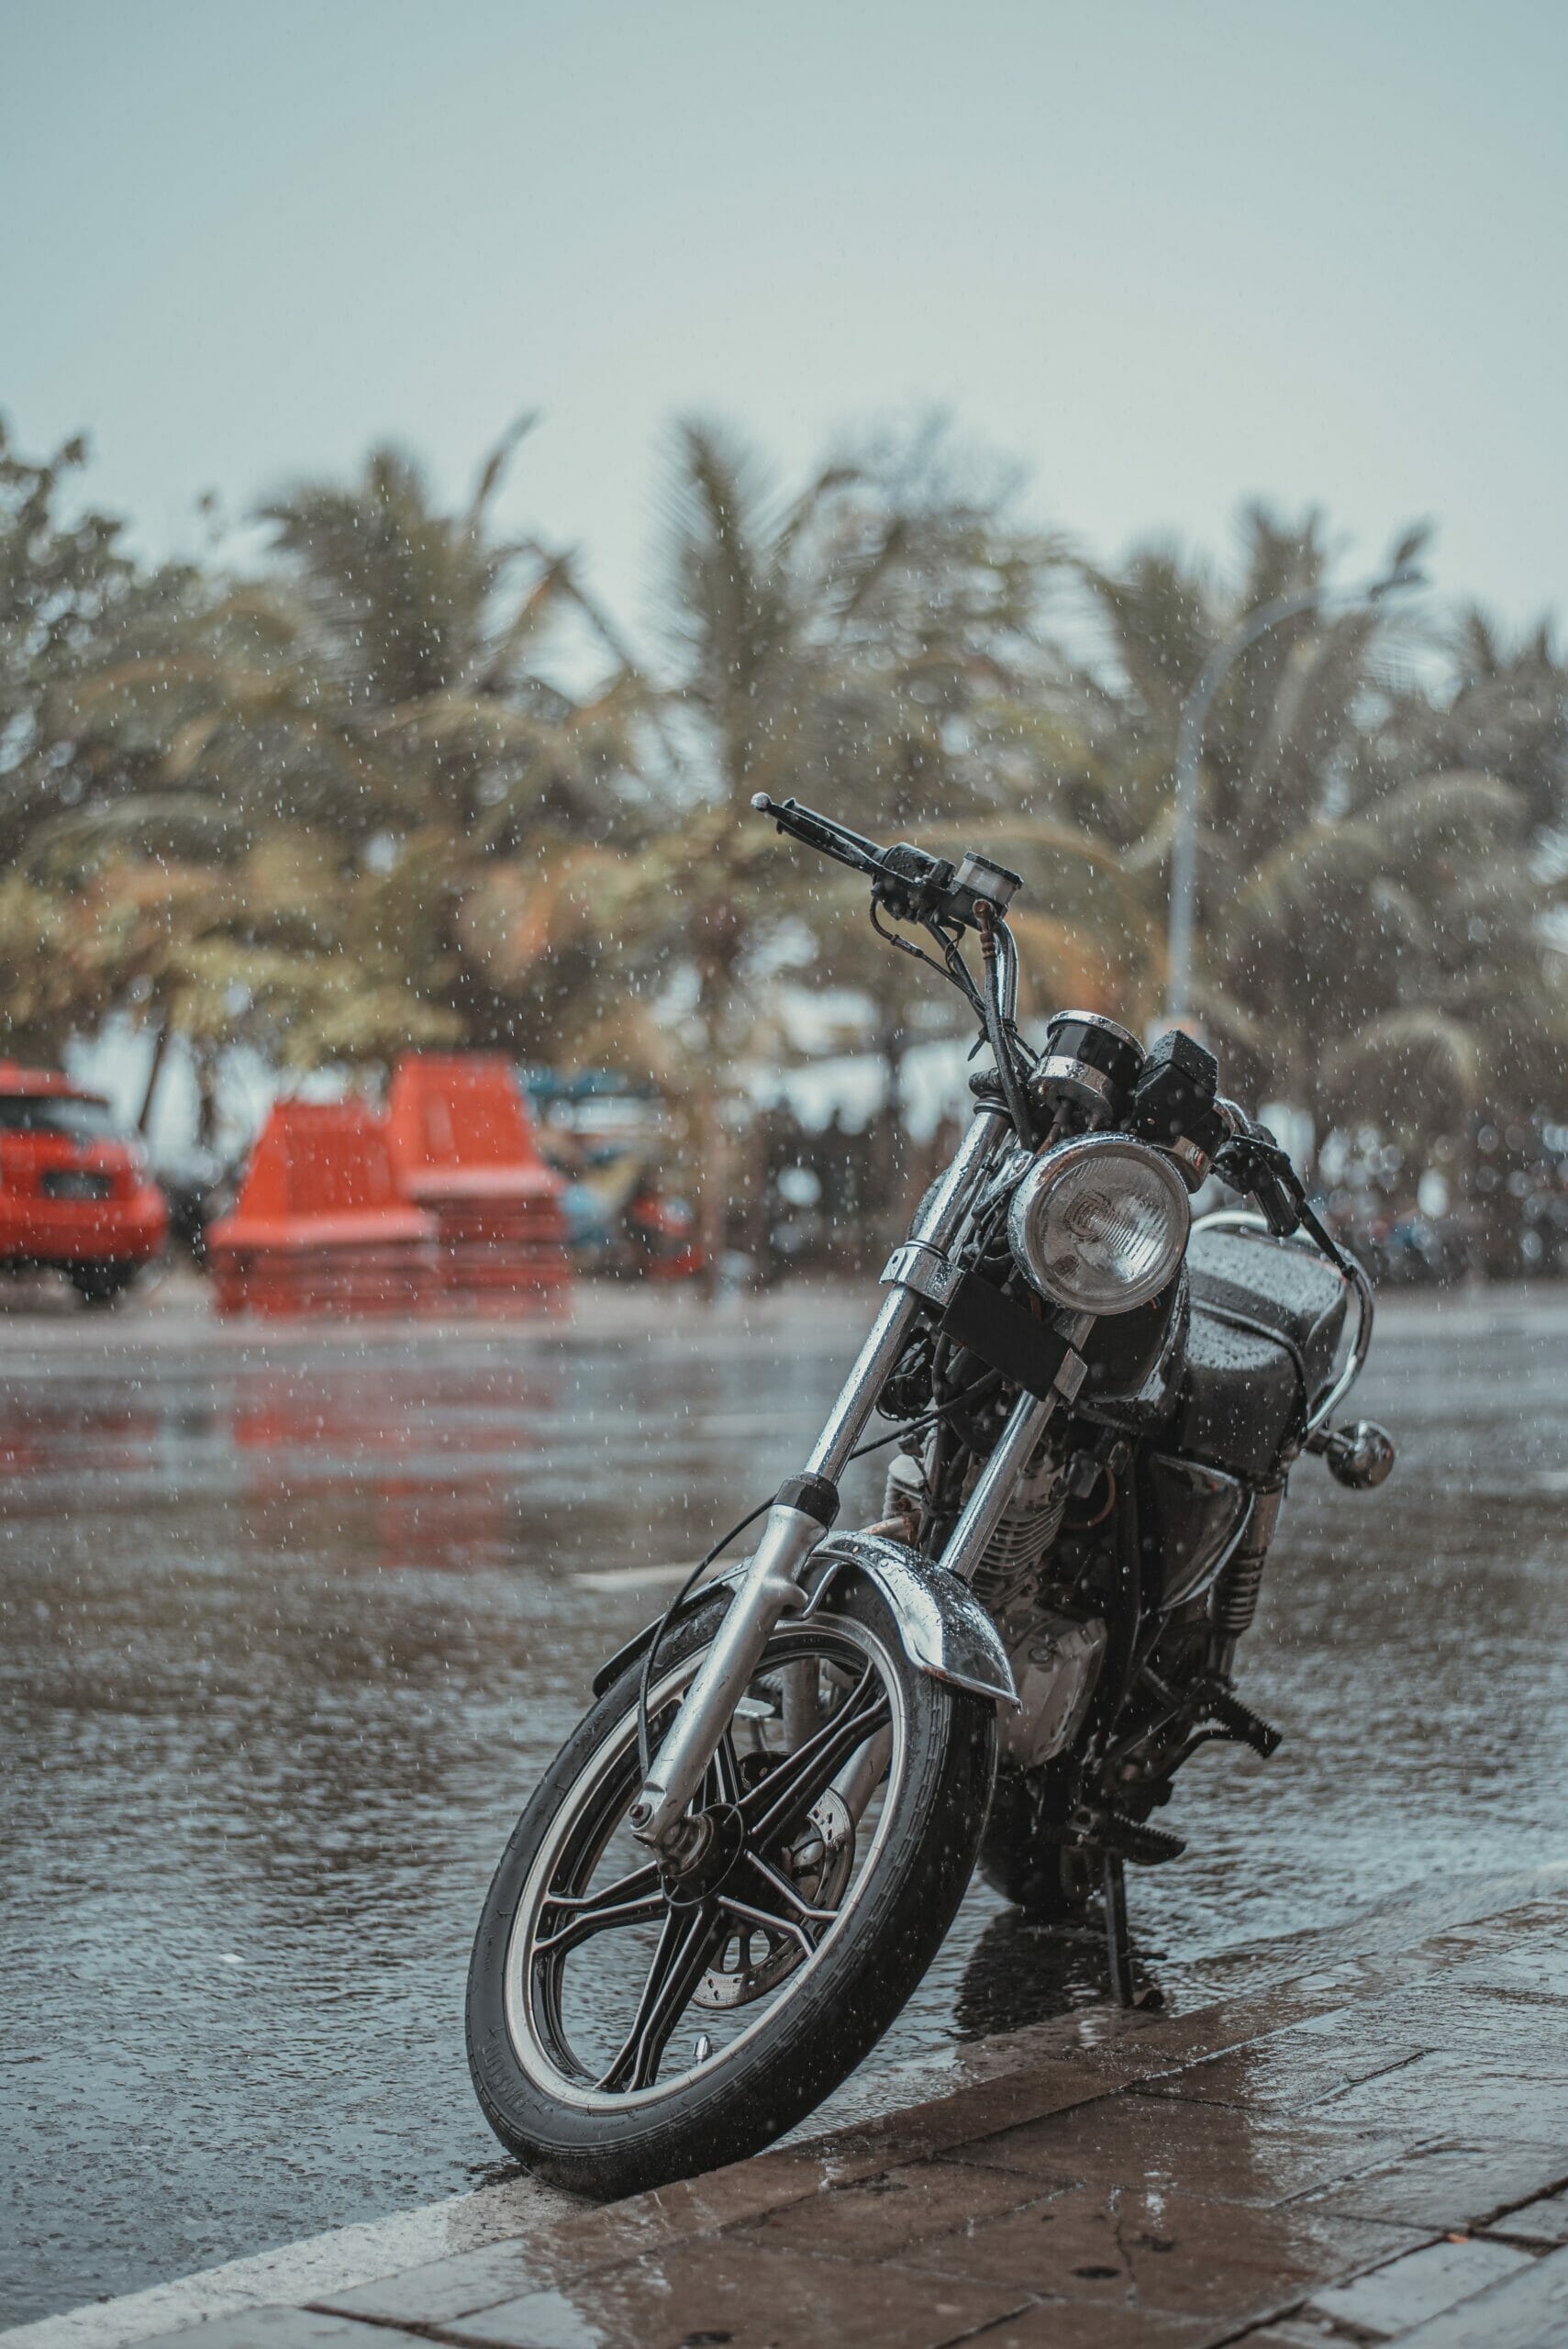 Bad Weather and Motorcycle Accidents